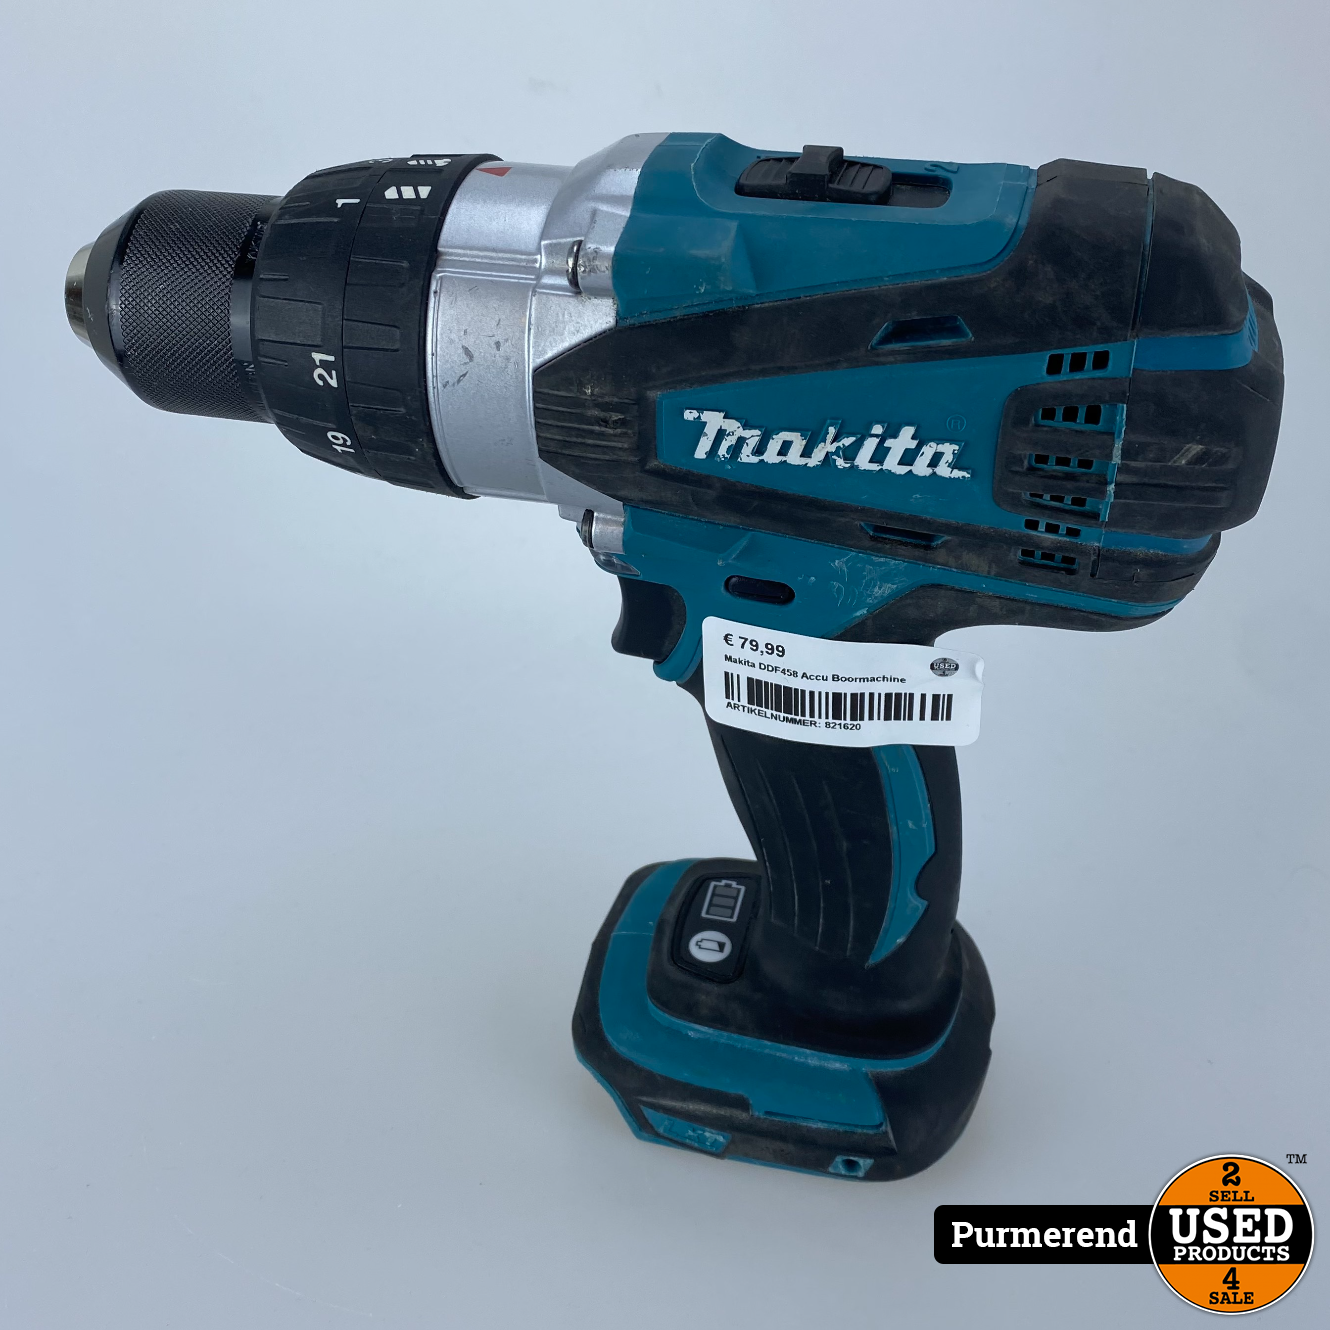 Makita DDF458 Accu Boormachine - Used Products Purmerend